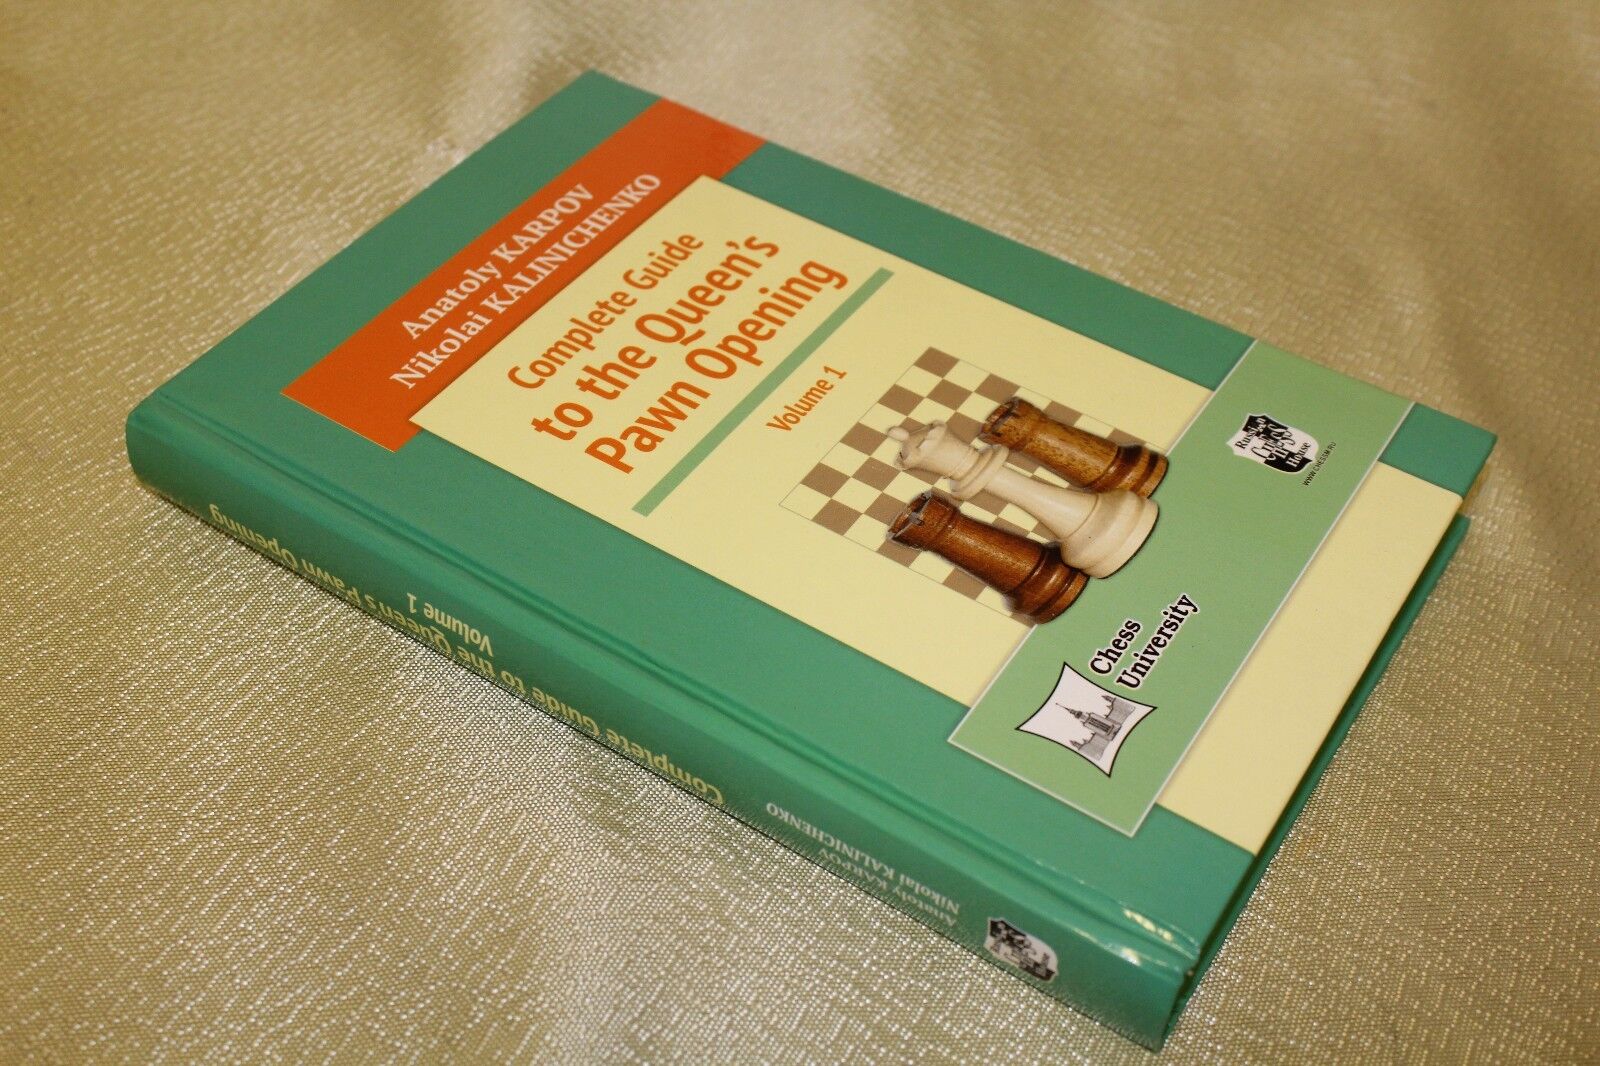 Encyclopaedia Modern Chess Opening Volume 1: Open Games by Nikolai (Editor)  (Foreword by Anatoly Karpov) Kalinichenko - Hardcover - 1994 - from Book  Happy Booksellers (SKU: 014321)